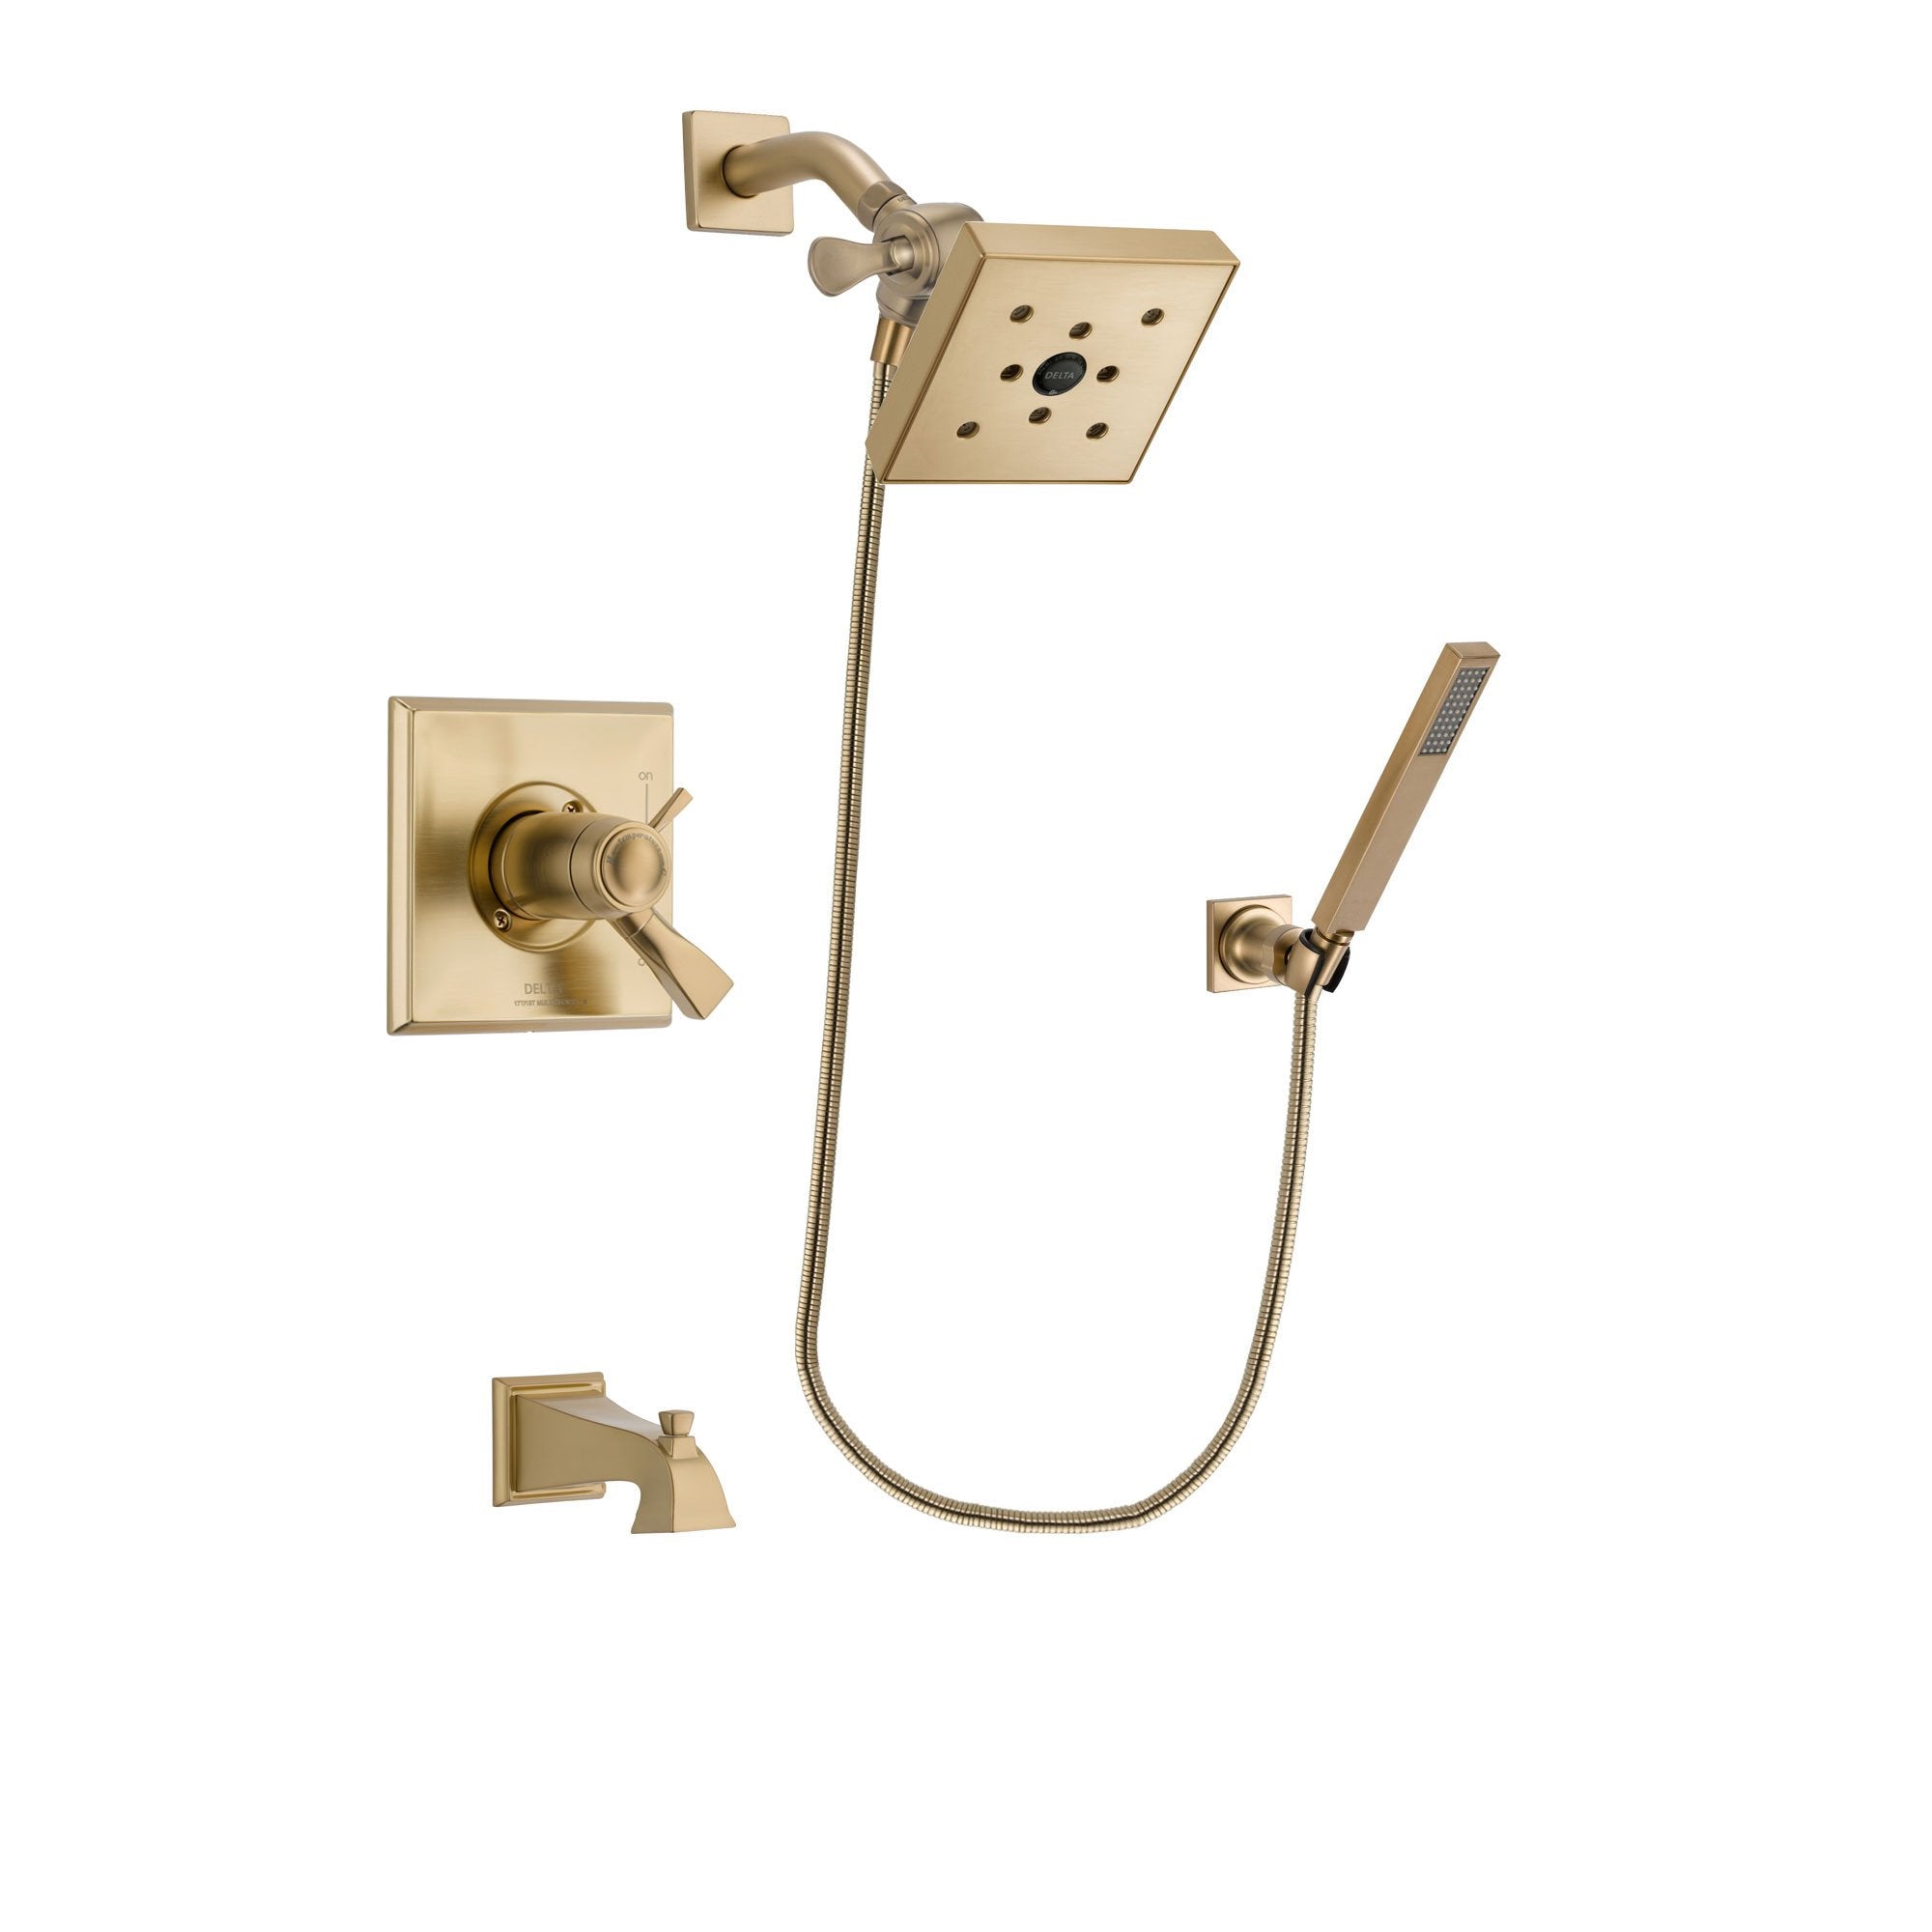 Delta Dryden Champagne Bronze Finish Thermostatic Tub and Shower Faucet System Package with Square Shower Head and Modern Wall-Mount Handheld Shower Stick Includes Rough-in Valve and Tub Spout DSP3897V